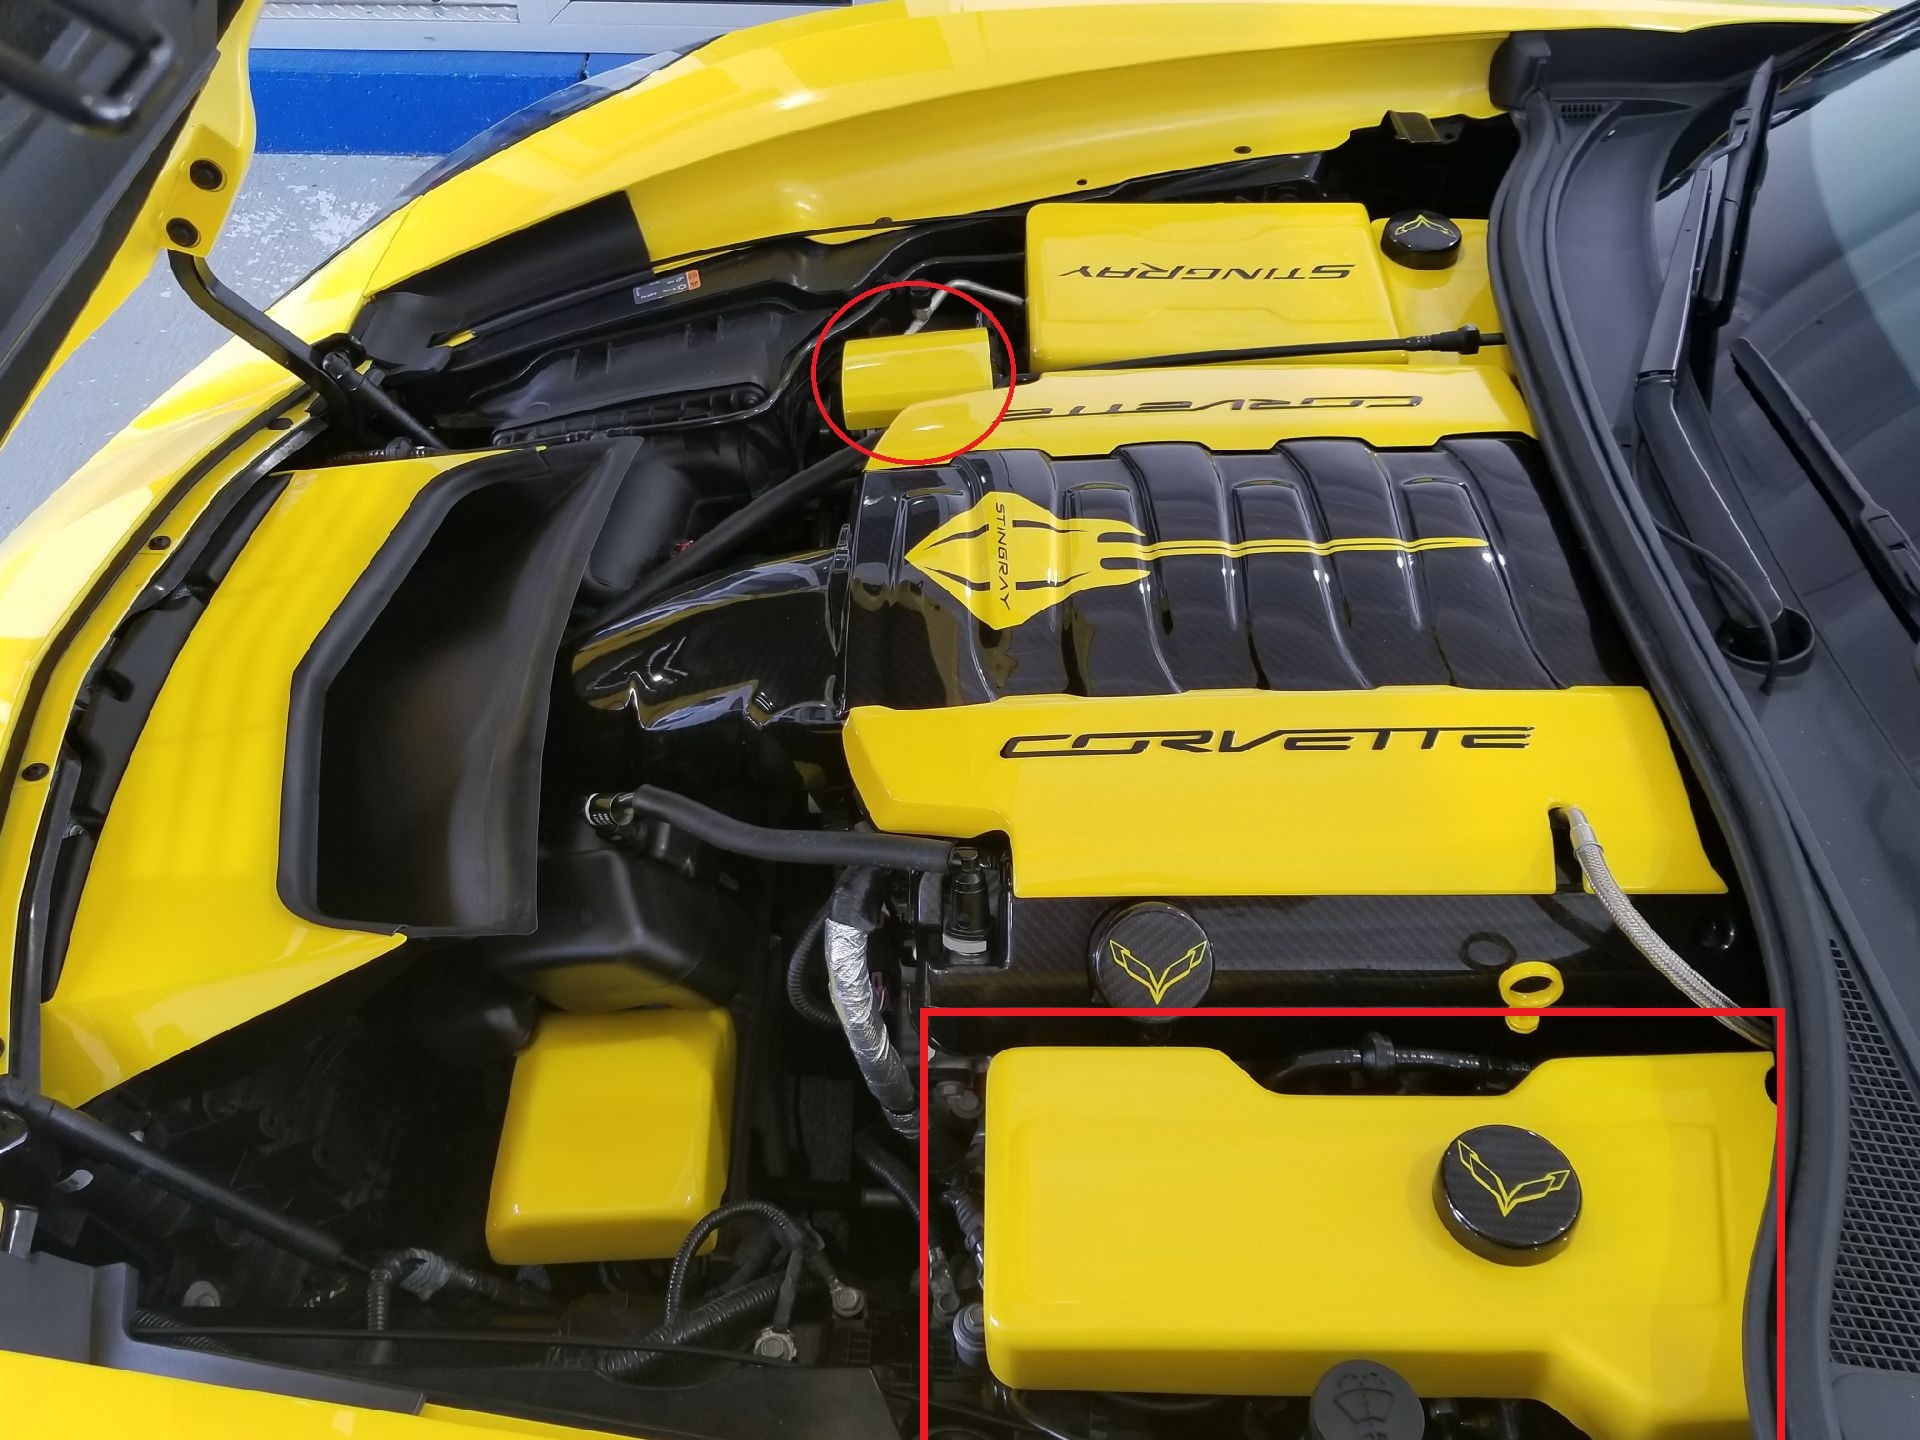 Installed Corvette C7 Engine Bay 14-Piece Show Kit by American Hydrocarbon